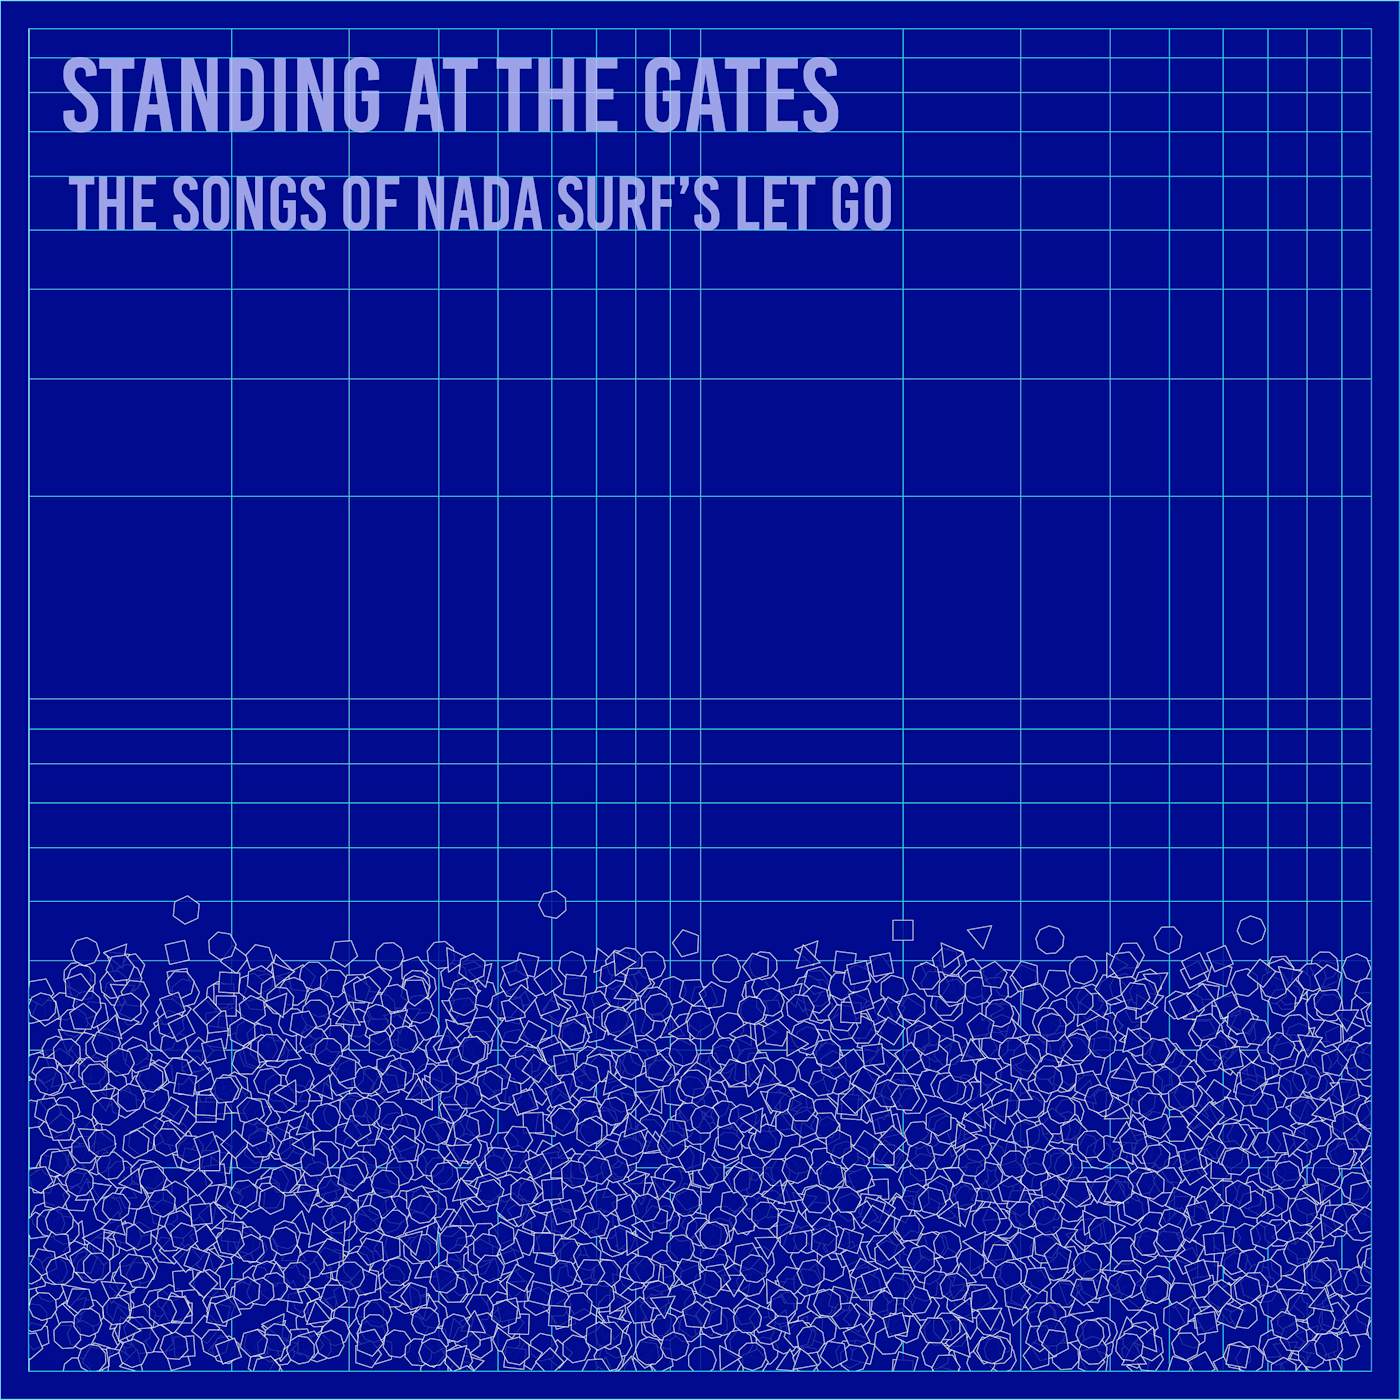 STANDING AT THE GATES: THE SONGS OF NADA SURF'S Vinyl Record